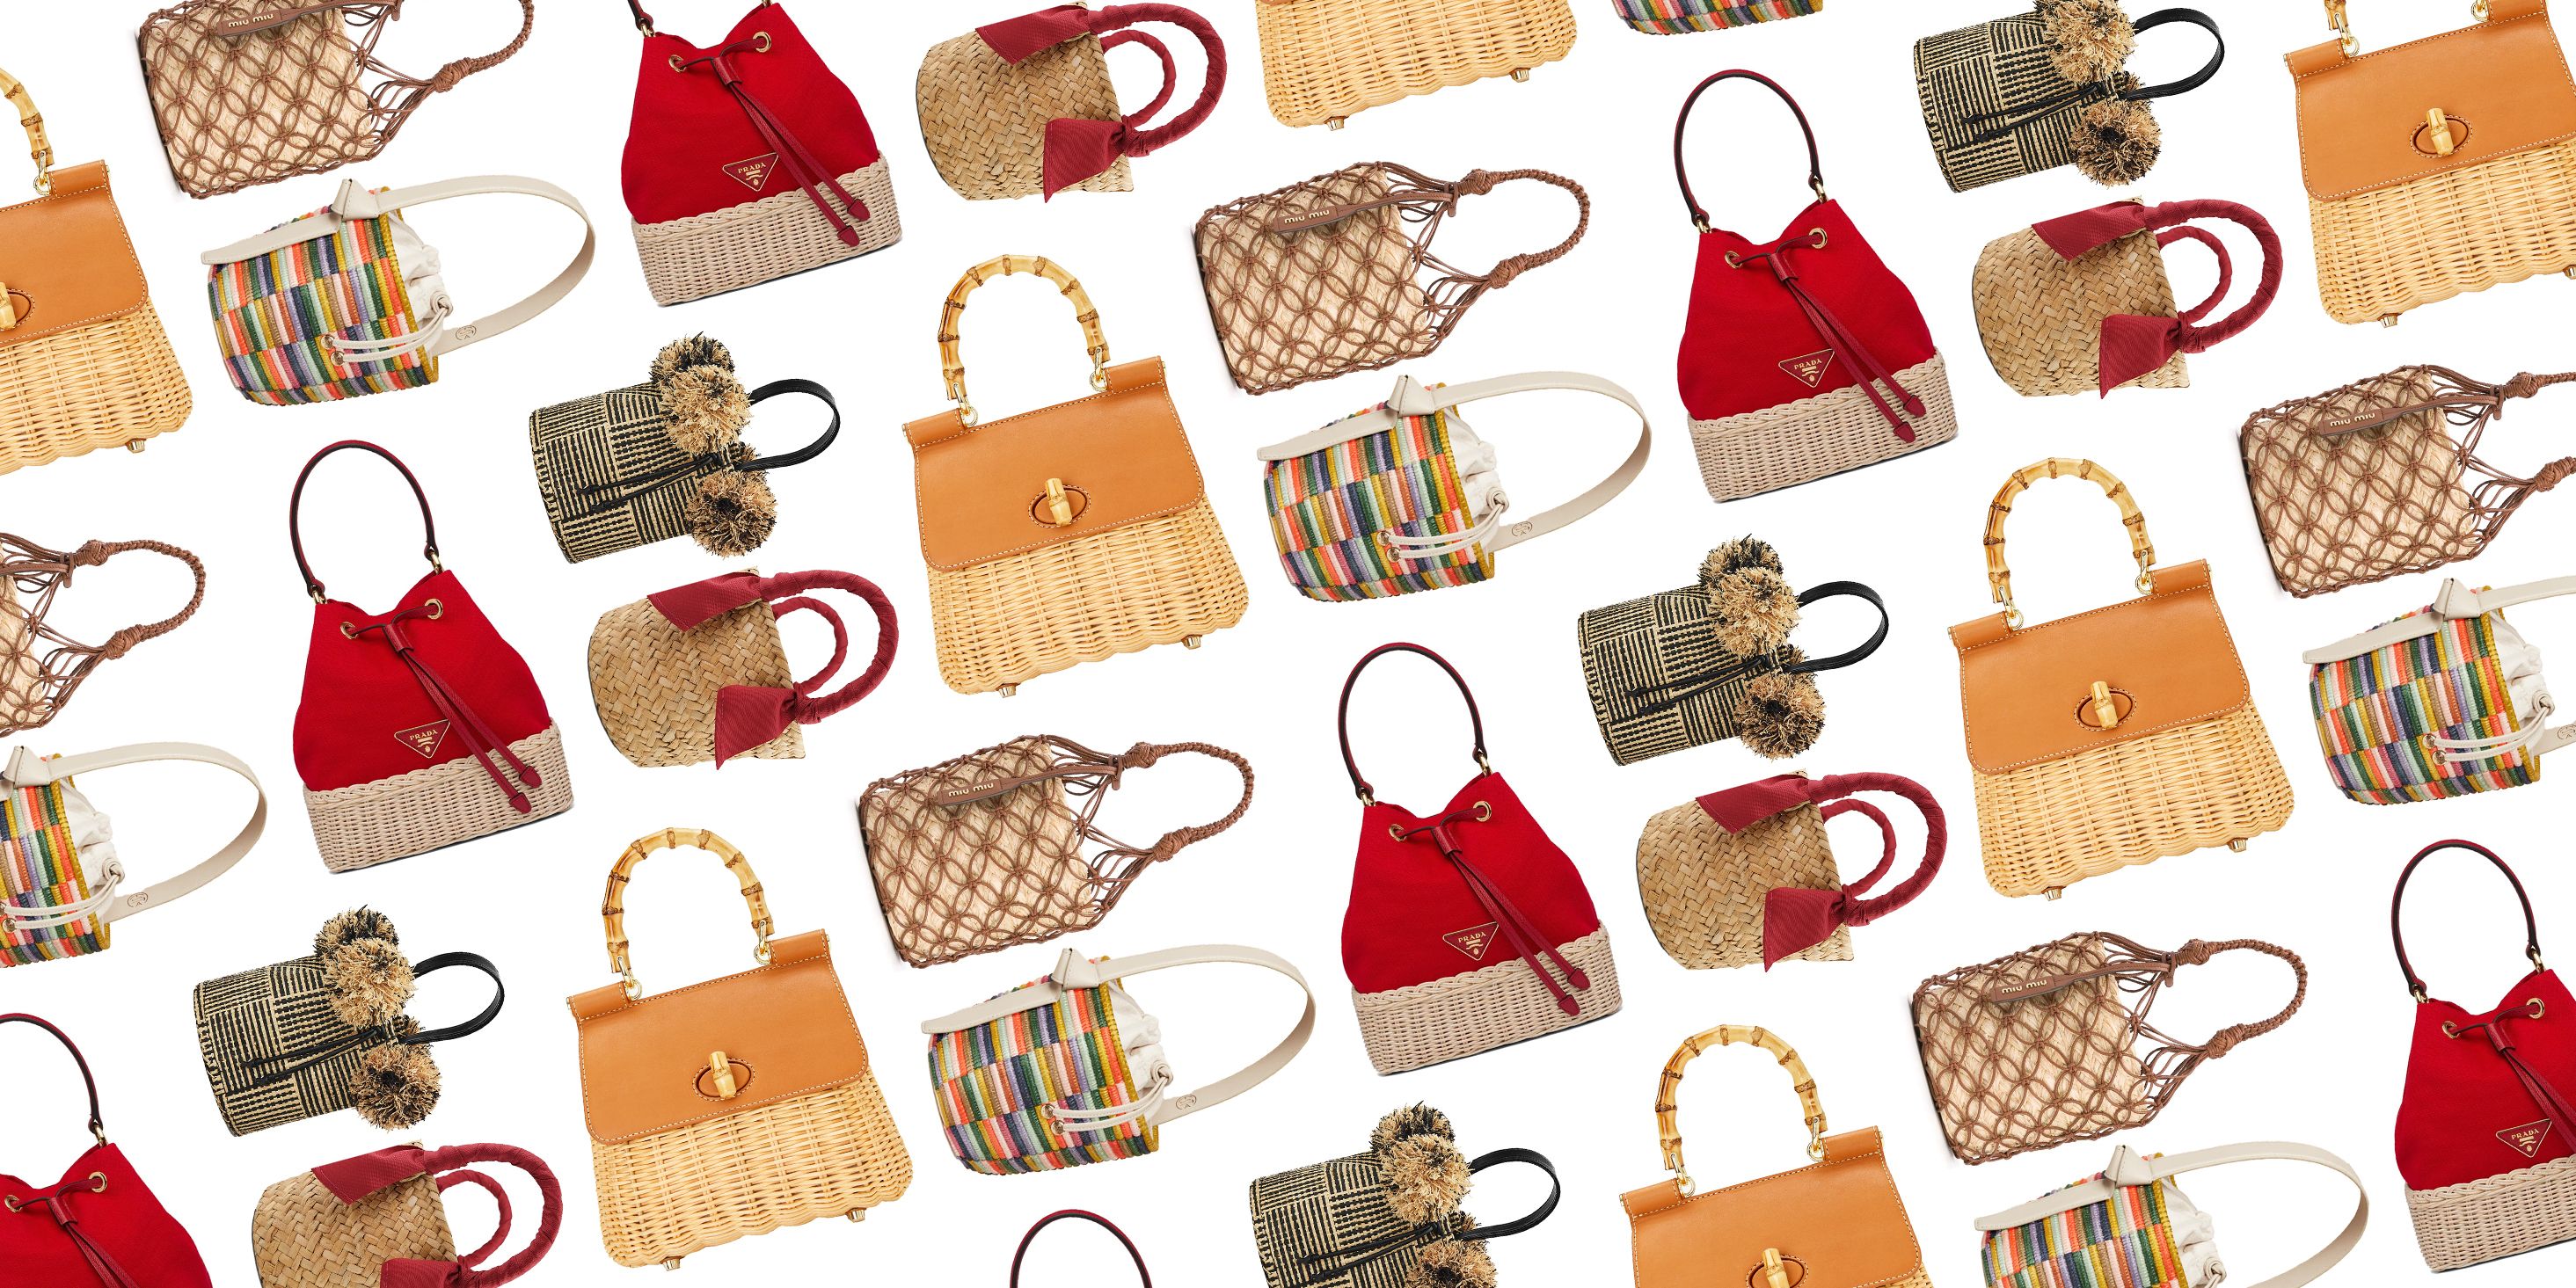 40+ Straw Bags, Purses & Clutches Perfect for Vacation - This is